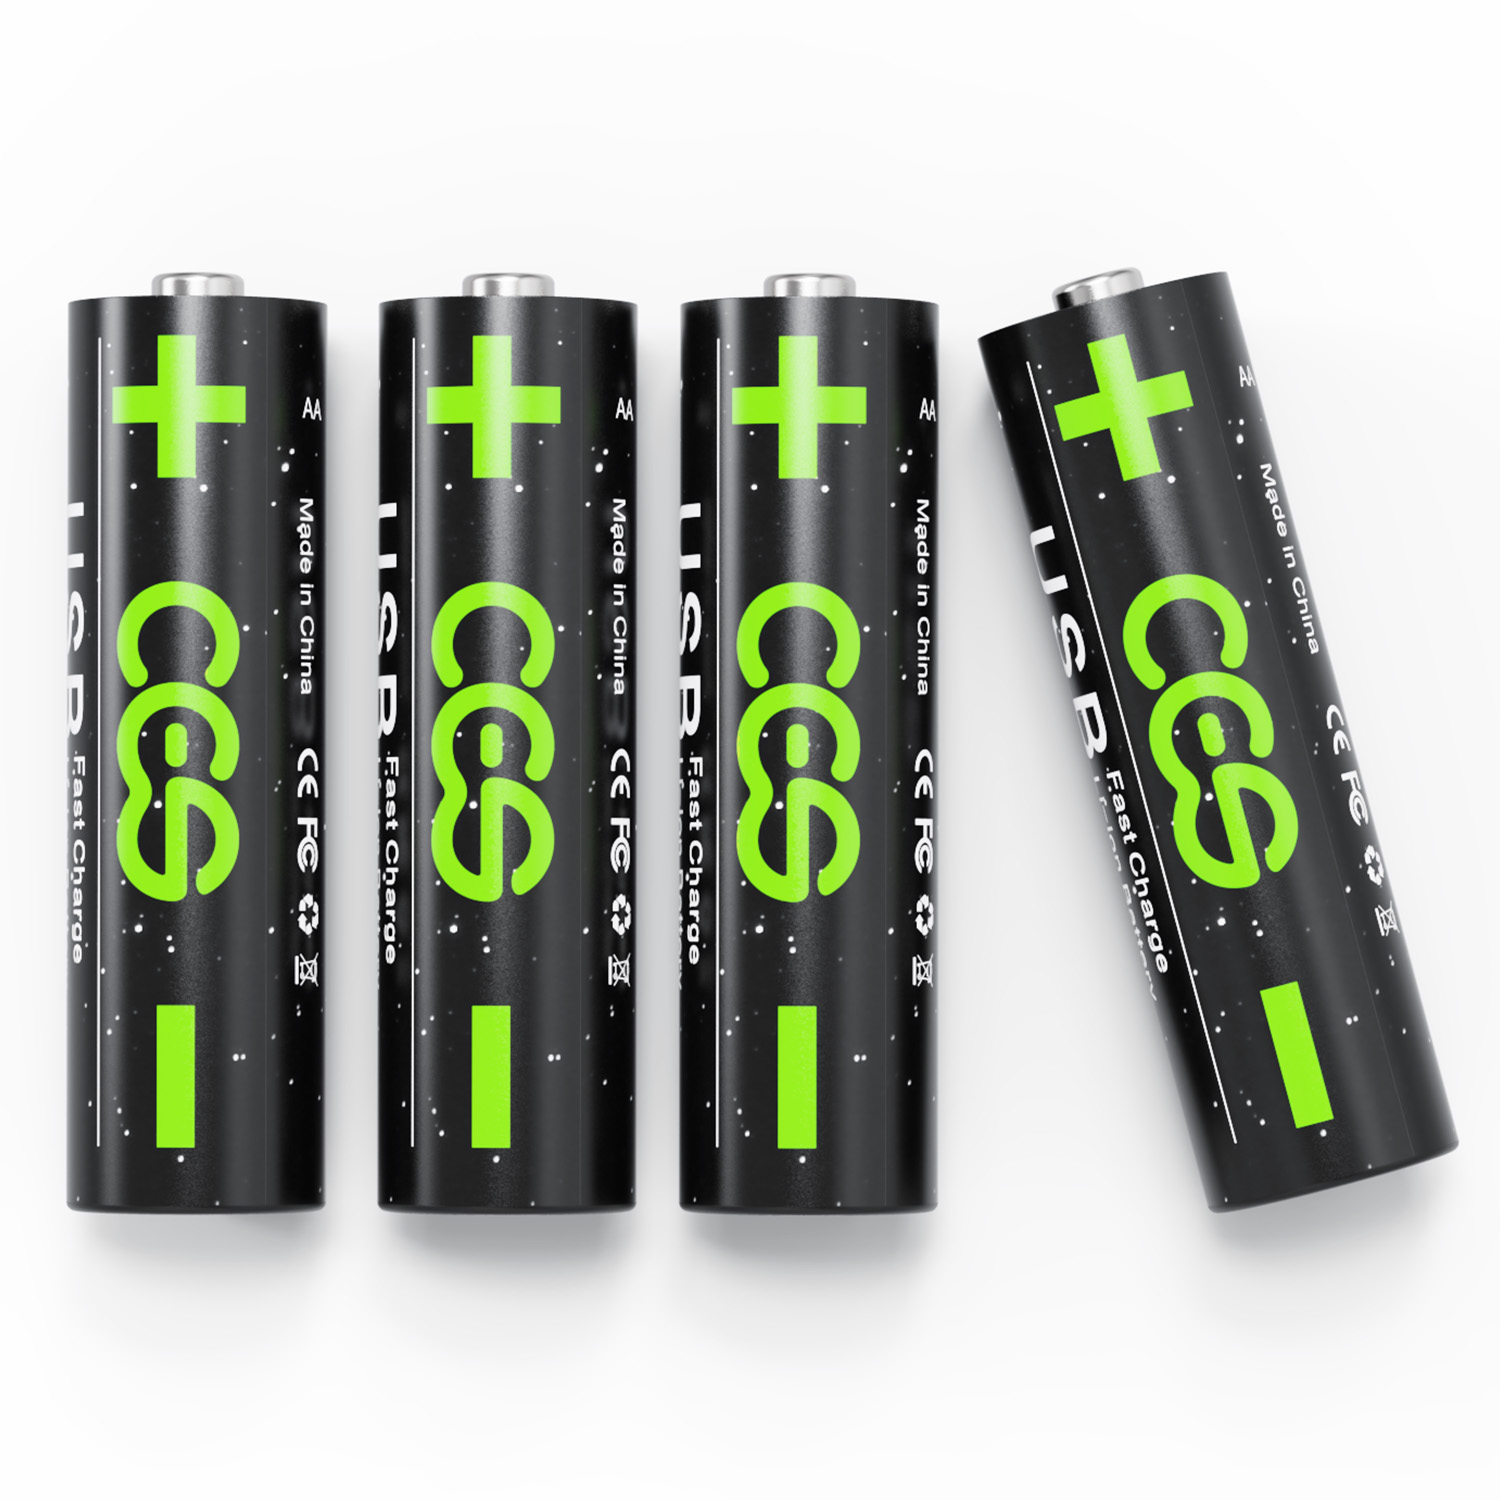 Ovegna M502: Lightweight AA Batteries, Lithium-ION (Non NiMH, Non Alkaline), 2775 mWh, 750 mAh, Rechargeable by USB input, in 90 Minutes, 1000 Times, Charge indicator, for Your Daily Needs Hover